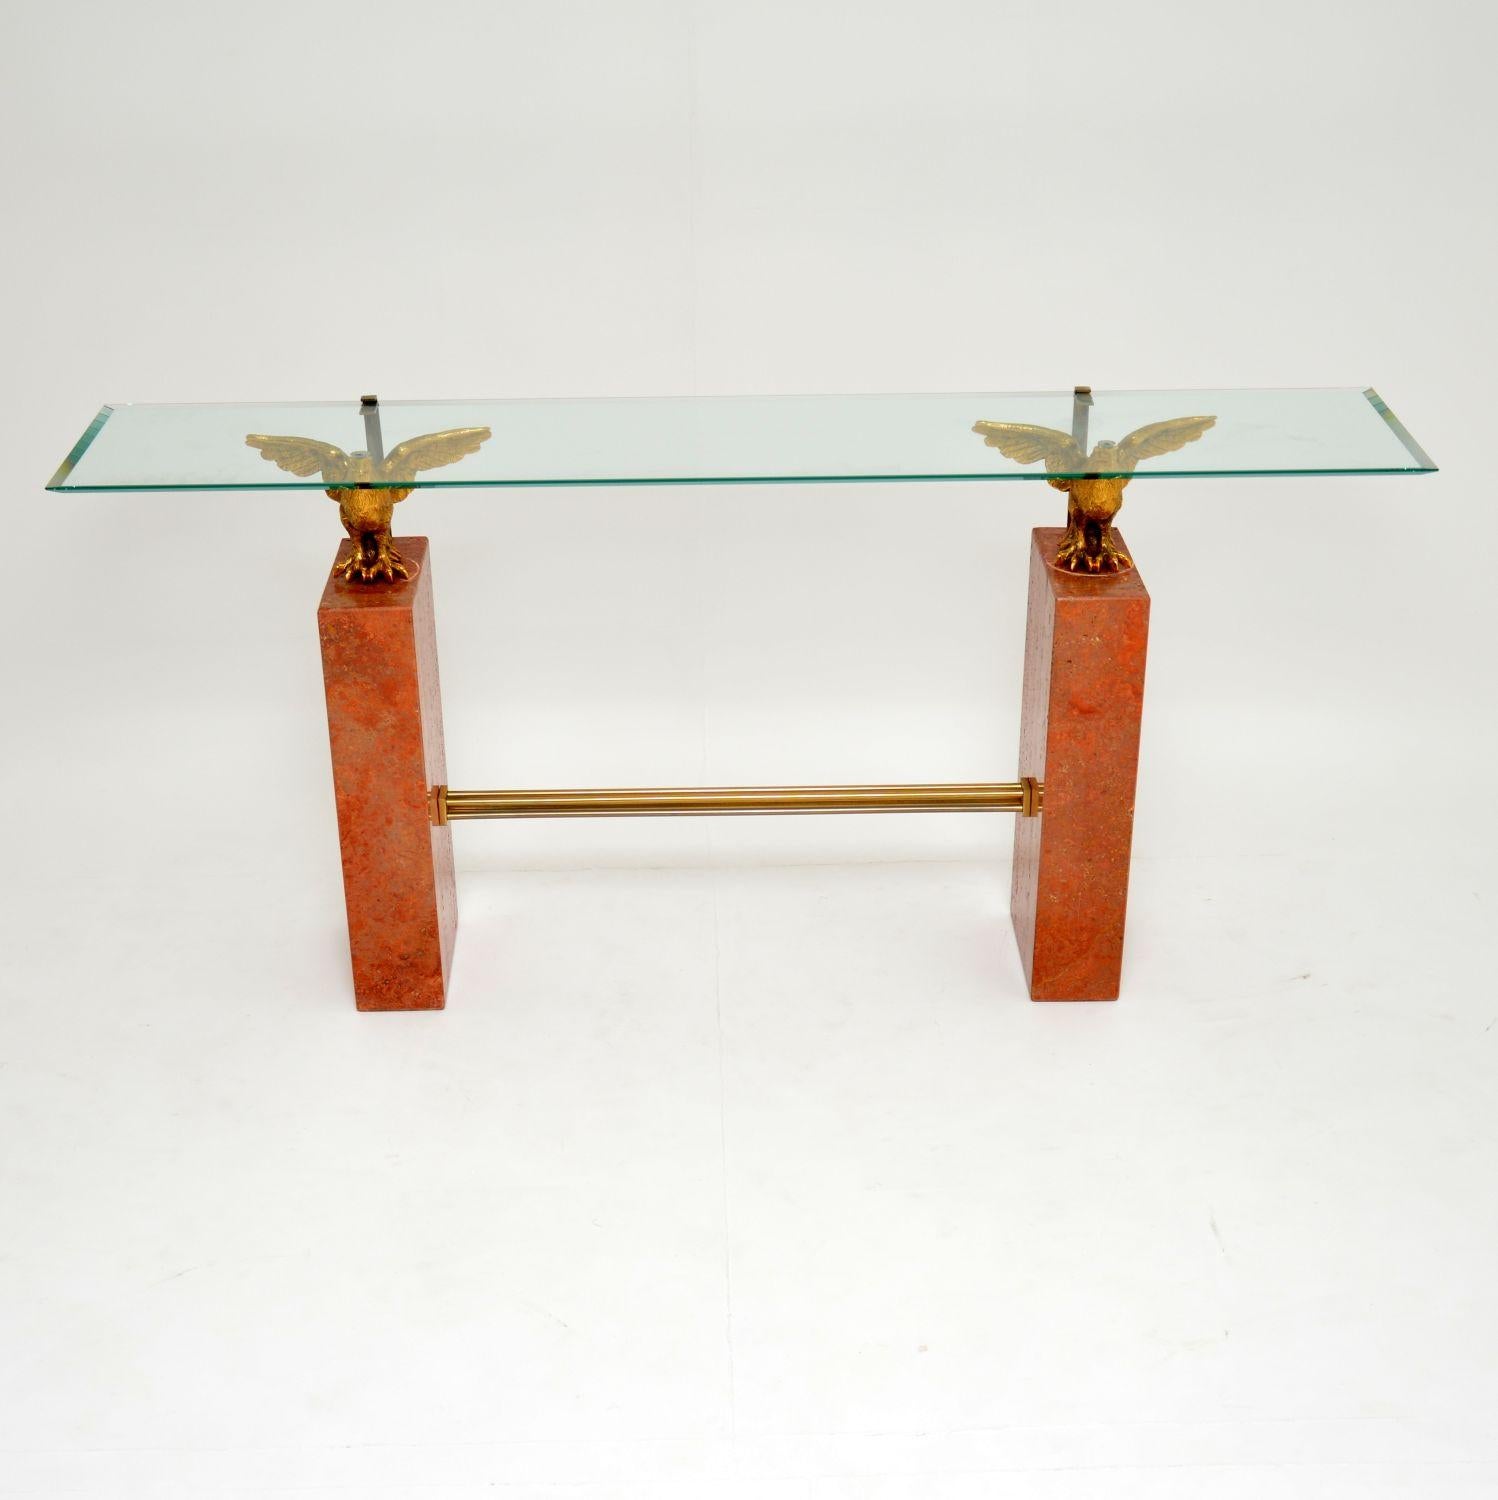 A stunning vintage console table, comprised of two solid marble pedestals, with brass fixtures and a bevelled glass top. The top is supported by solid brass eagles, this piece of furniture is superb quality all round. The condition is excellent for